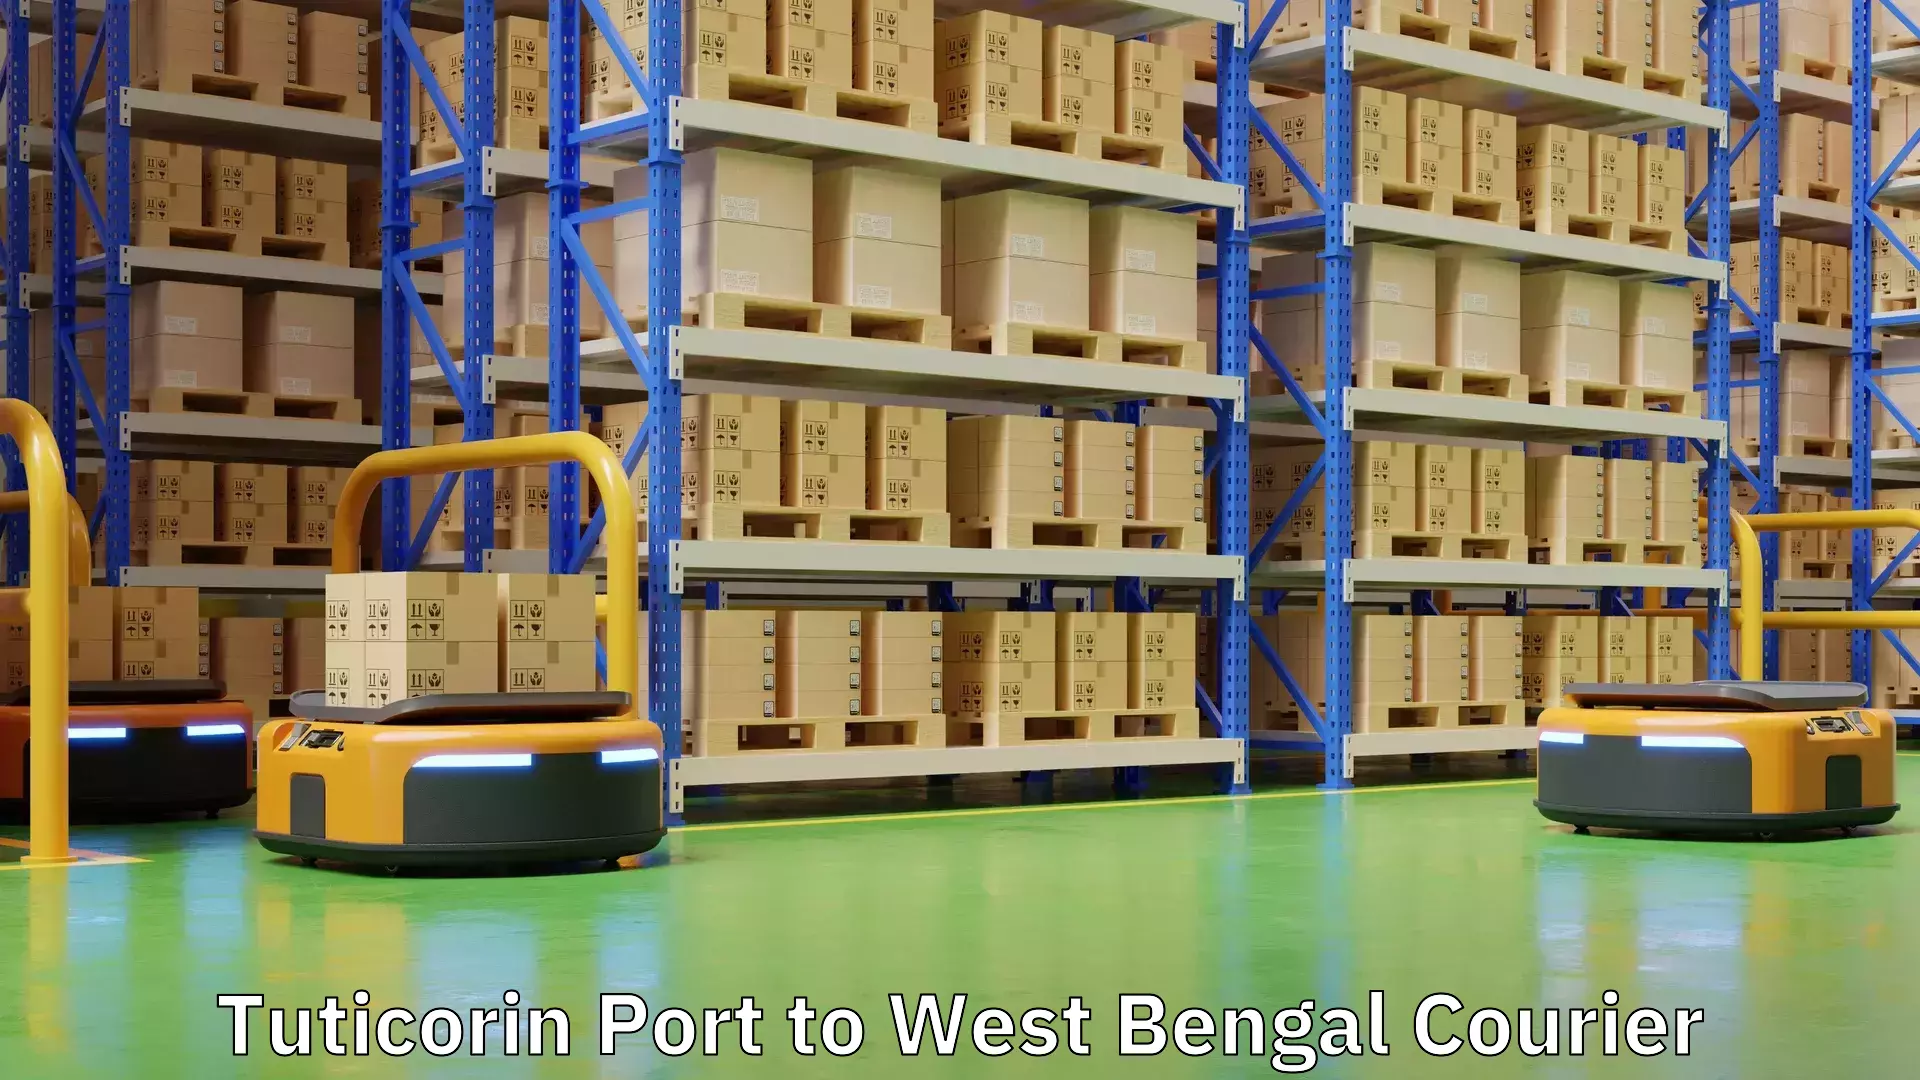 Nationwide shipping coverage Tuticorin Port to West Bengal